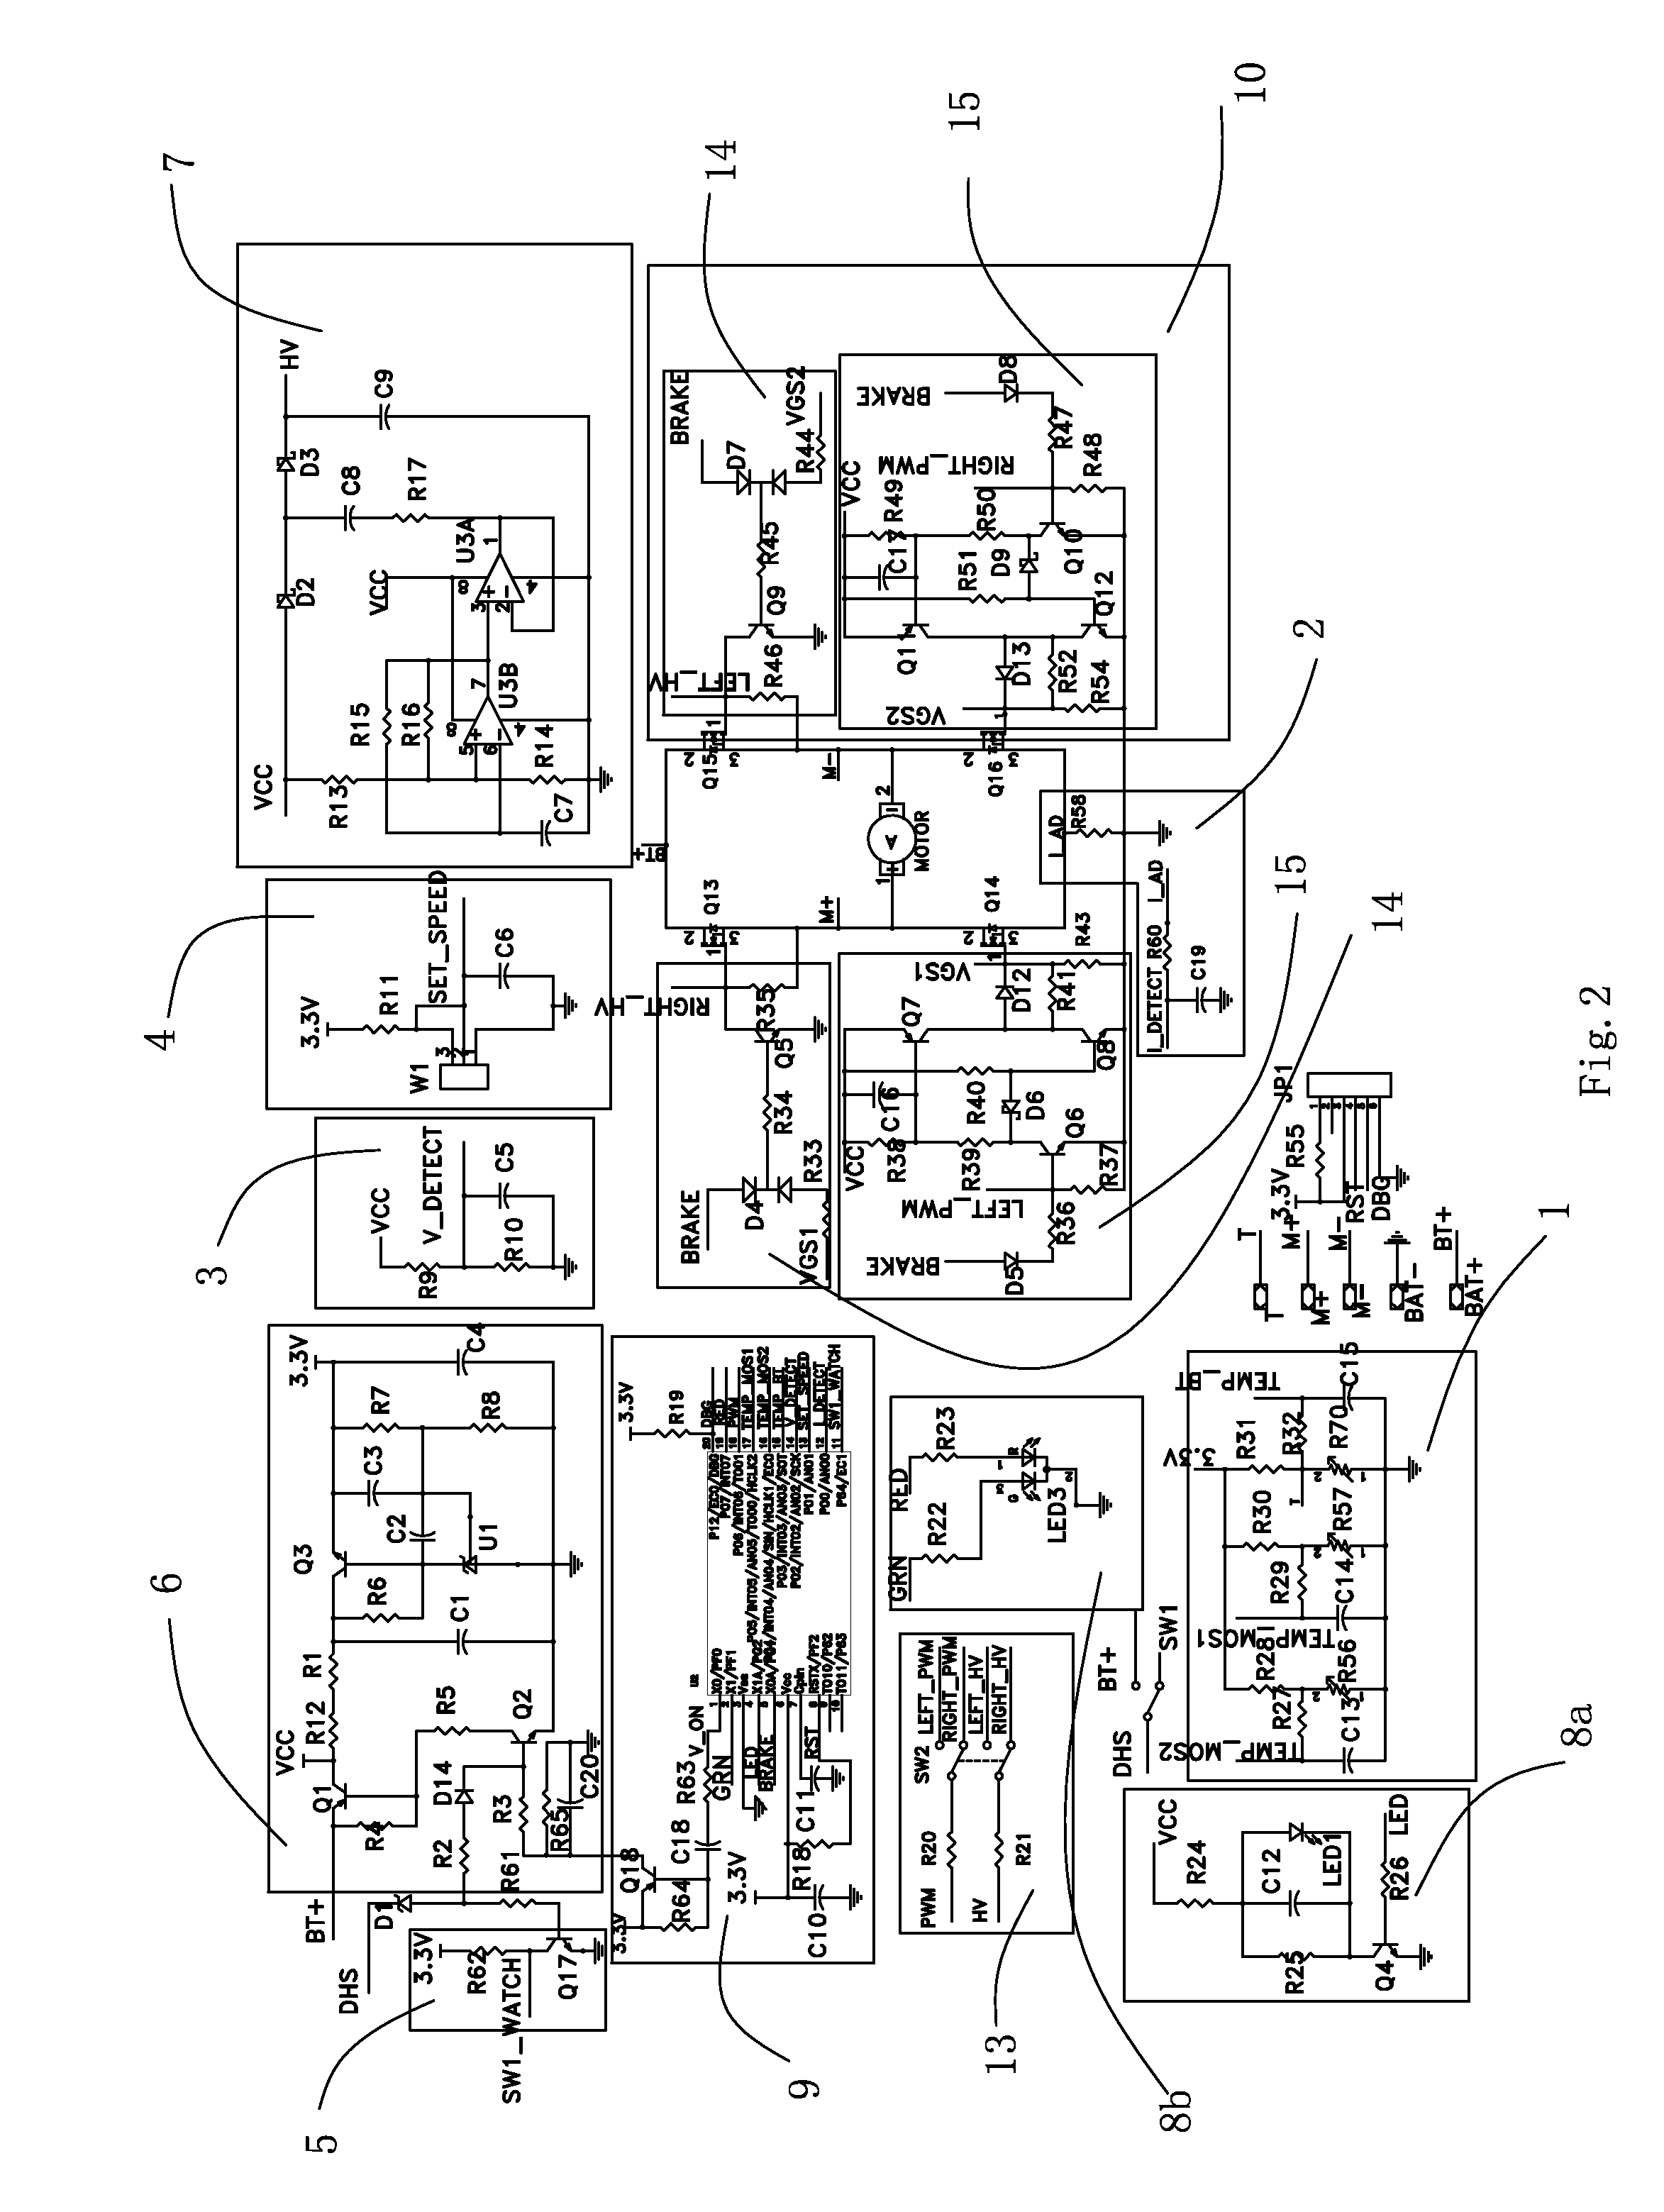 Over-temperature protection circuit for power devices